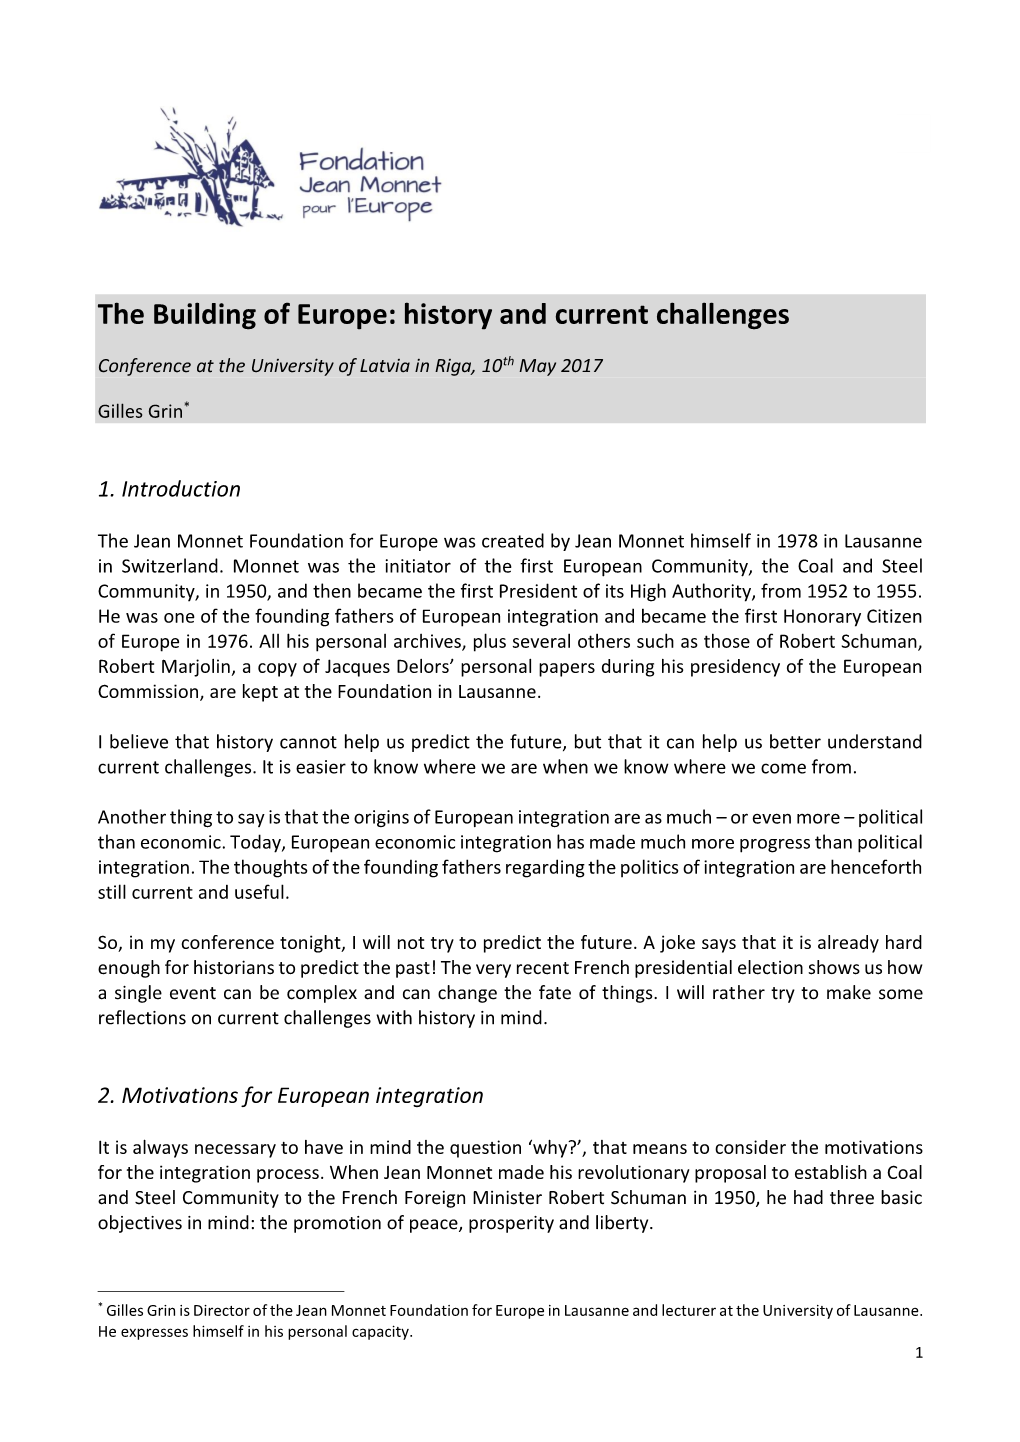 The Building of Europe: History and Current Challenges